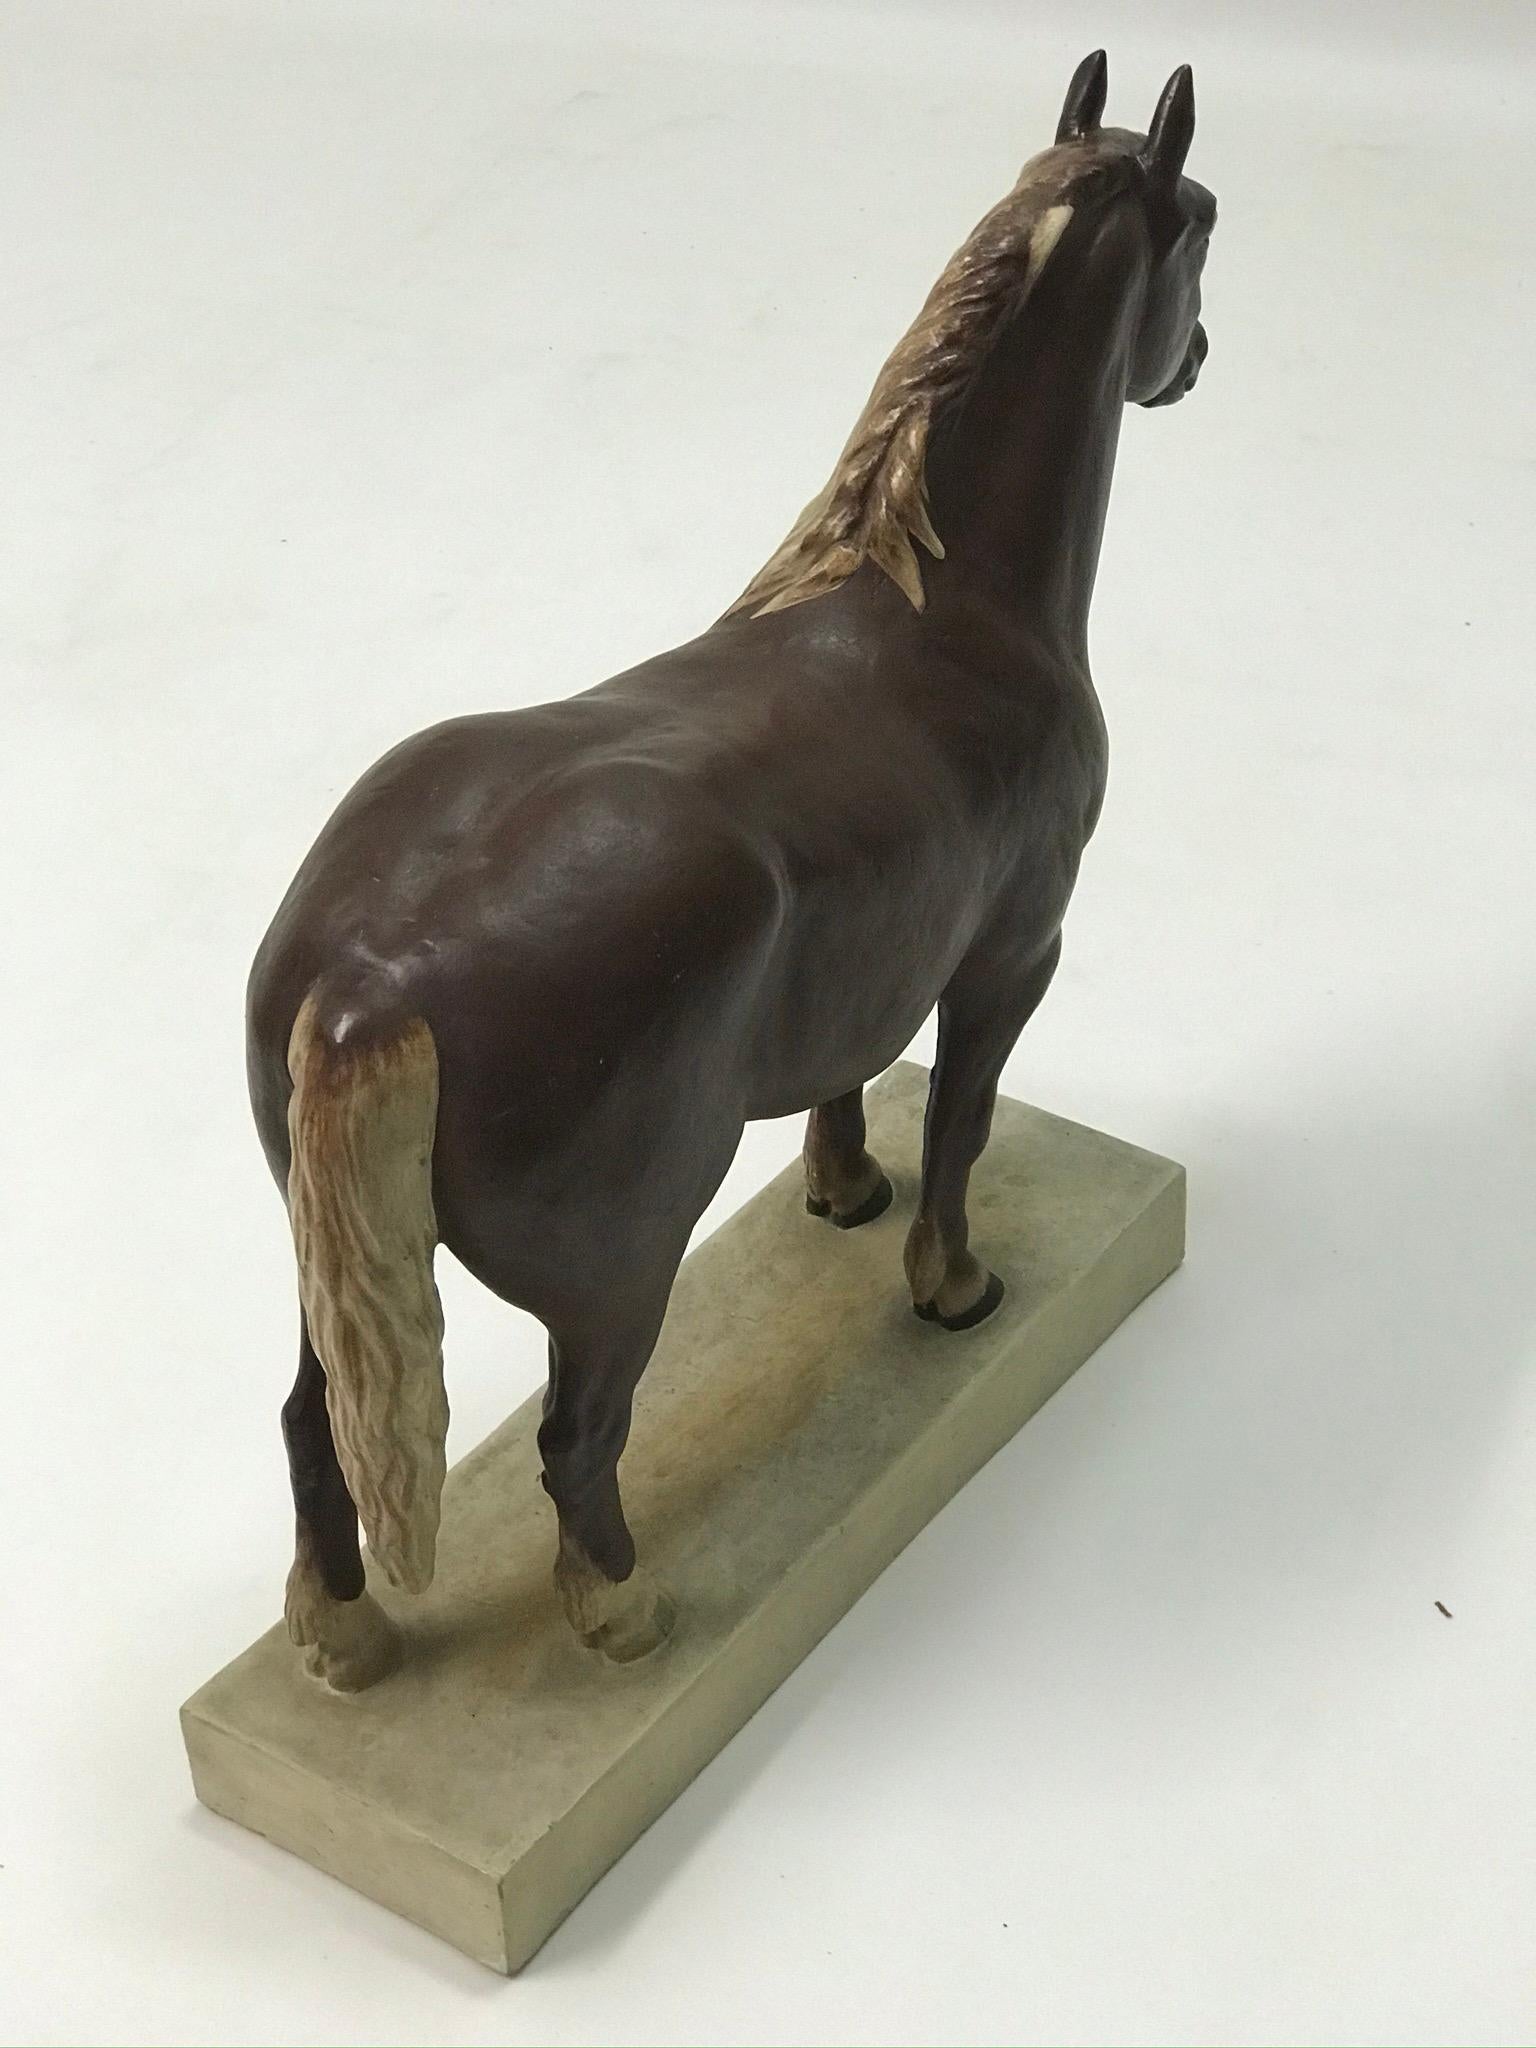 Painted Gypsum School Model of a Horse, 